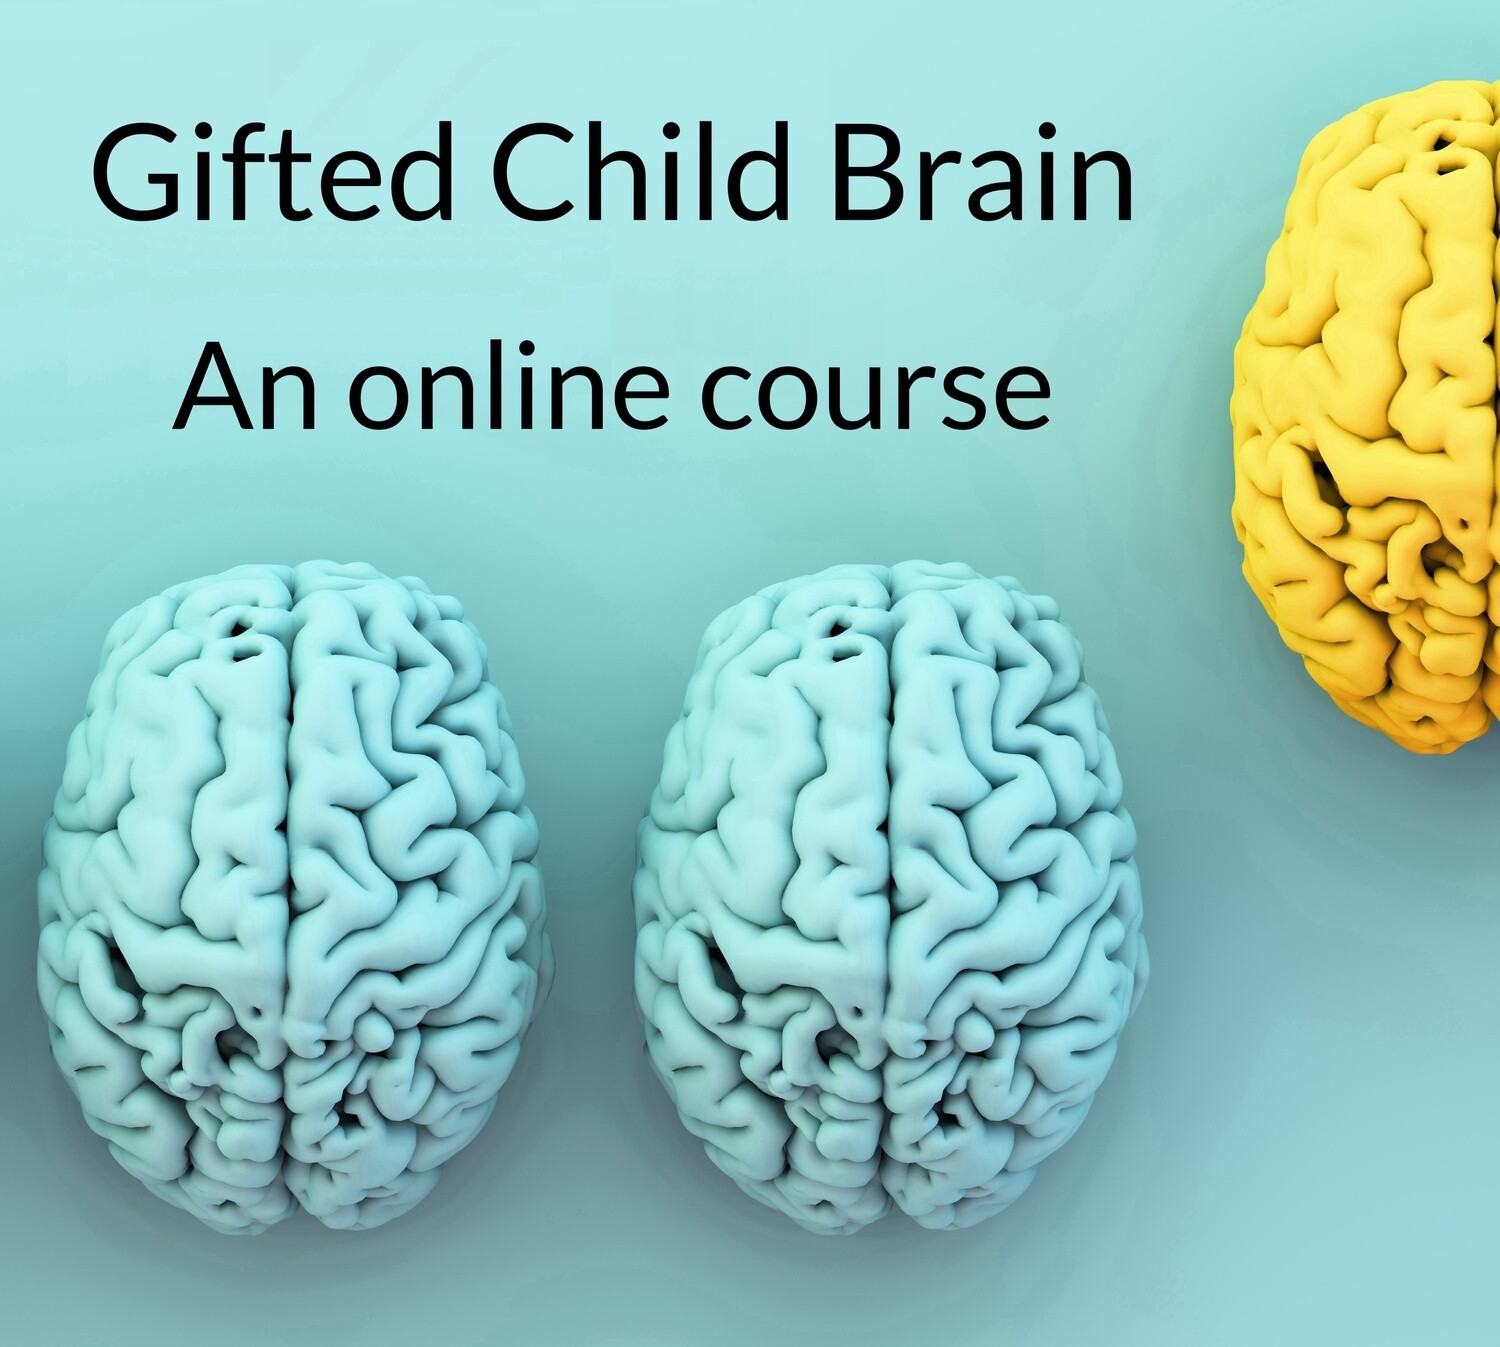 Gifted Child Brain: 4 session online course streaming on-demand